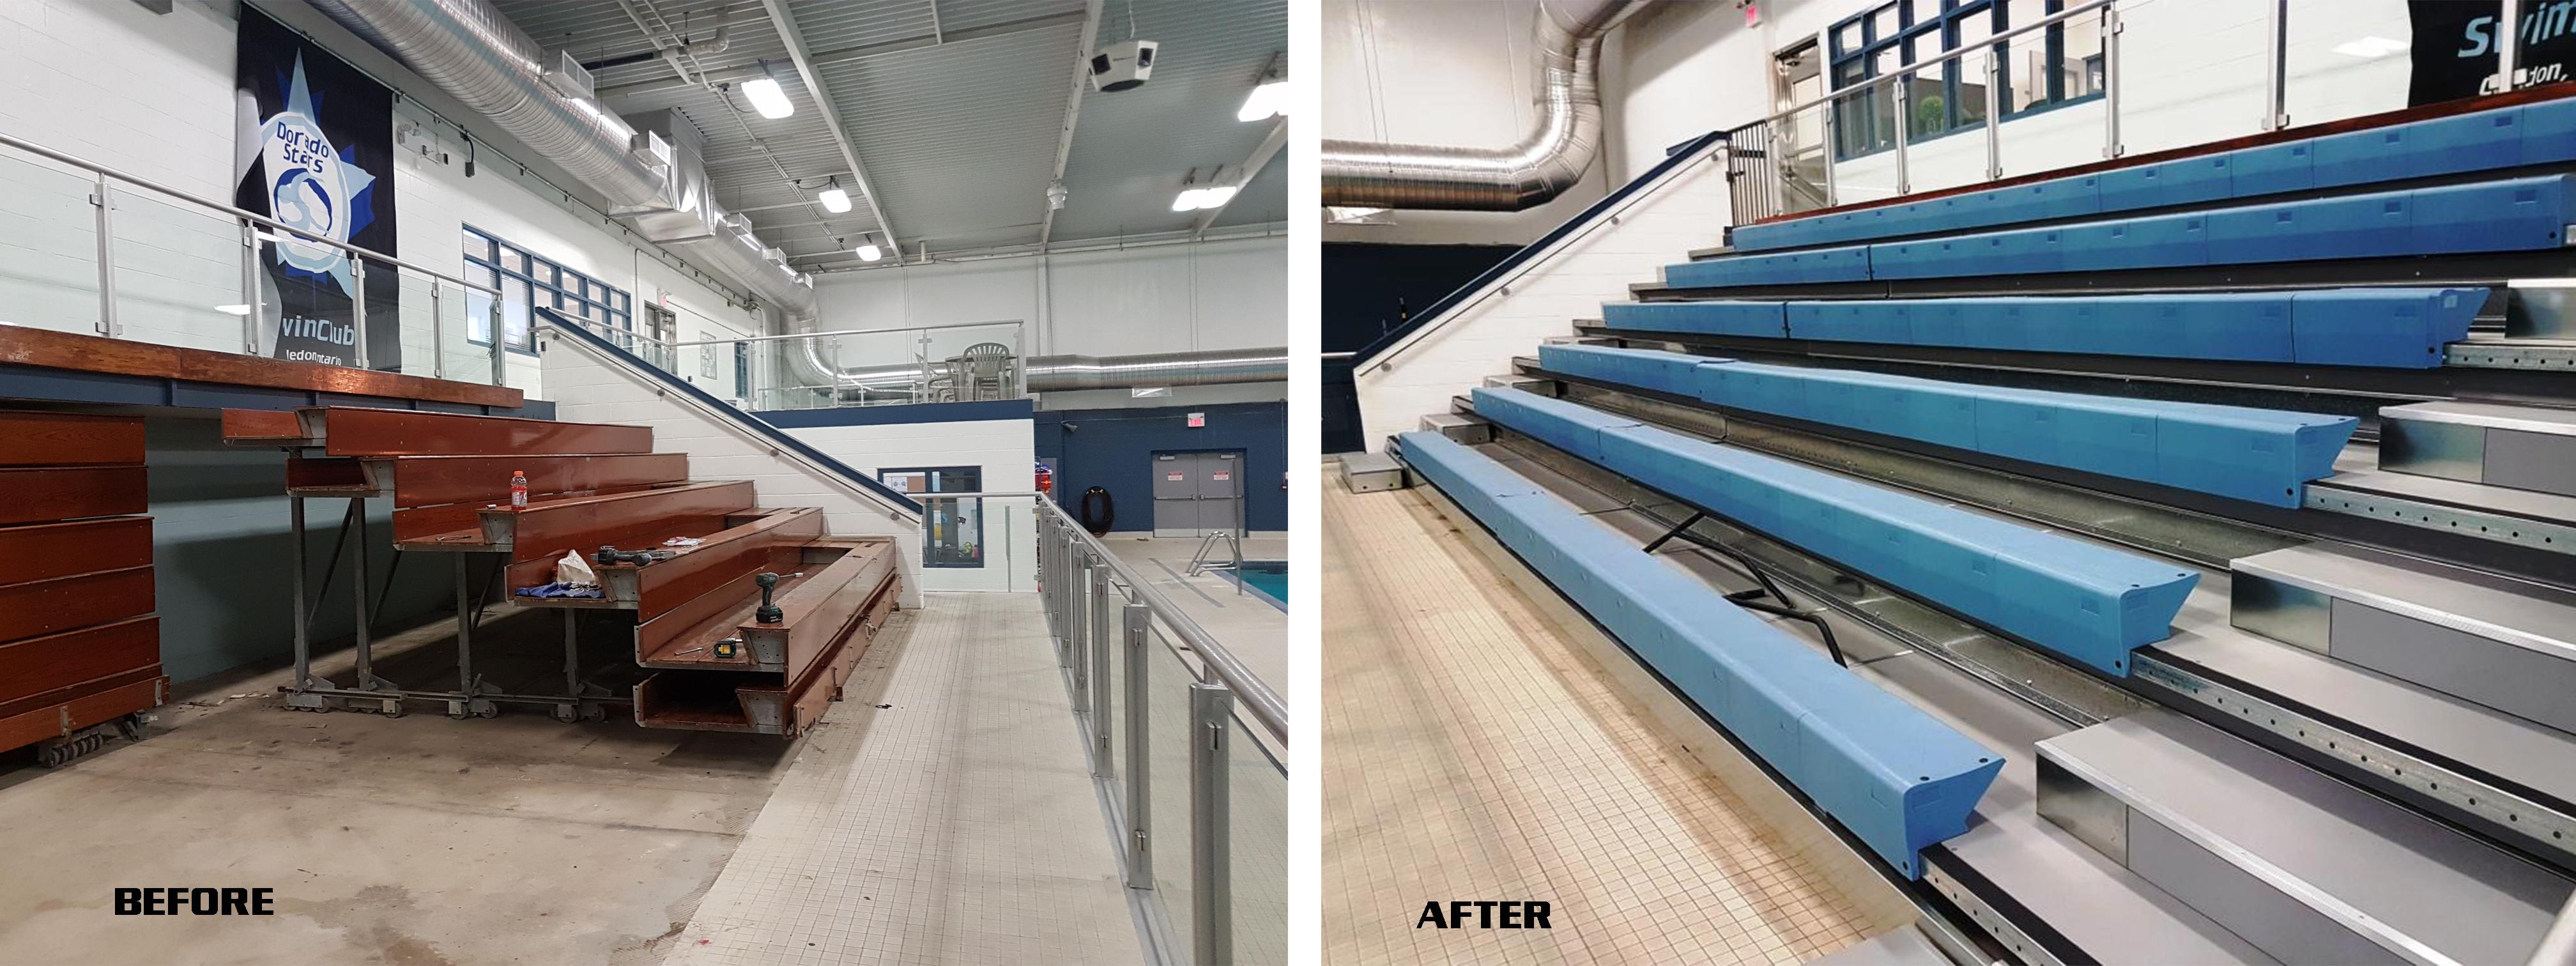 New Retractable Bleachers for Mayfield Recreation Centre